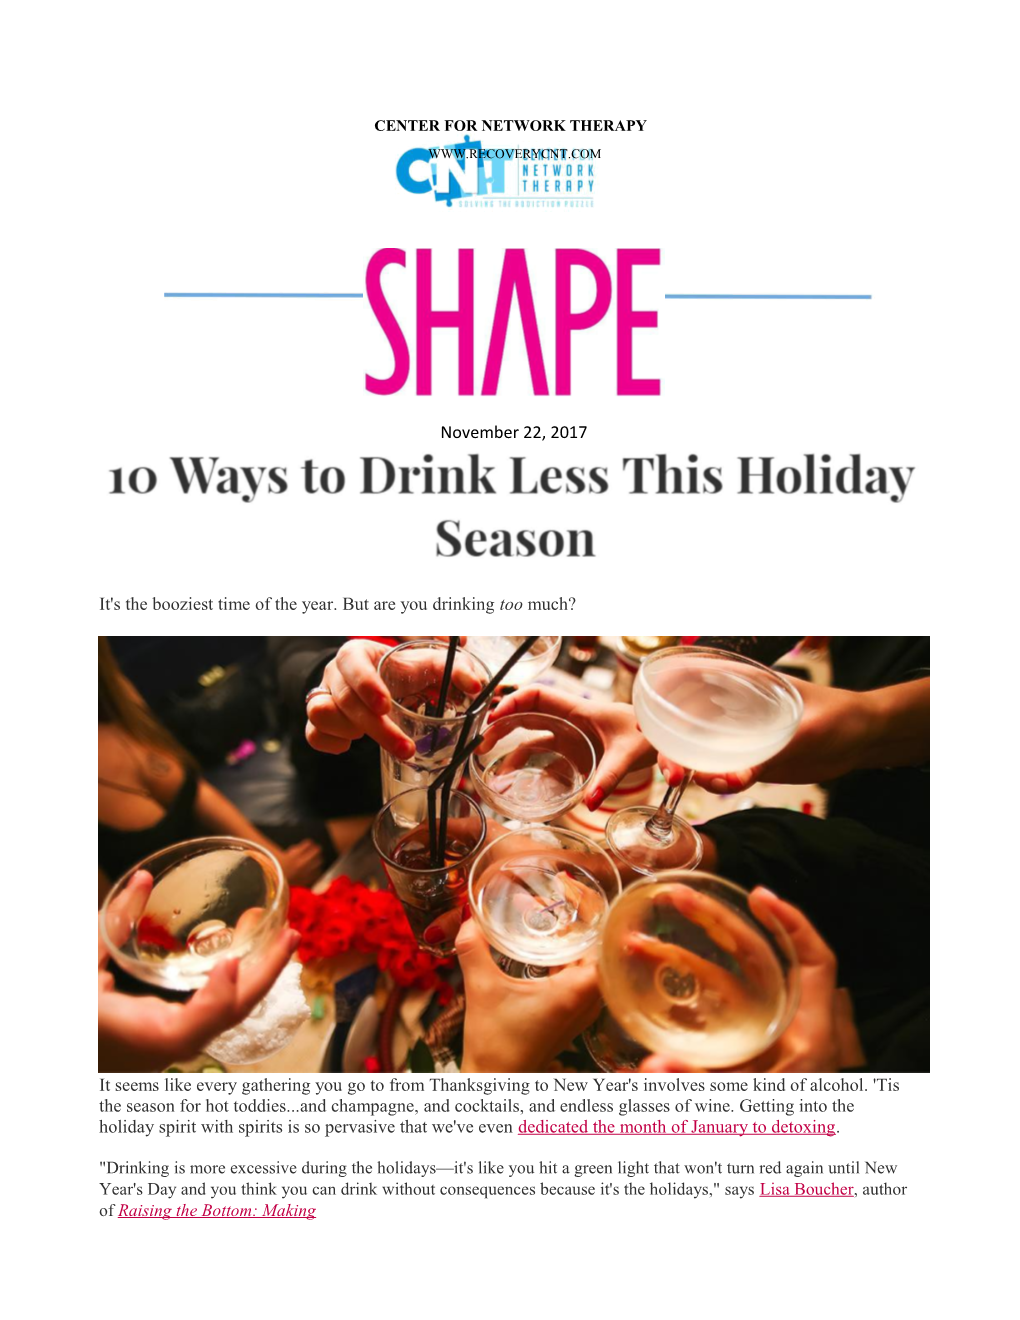 It's the Booziest Time of the Year. but Are You Drinking Too Much?